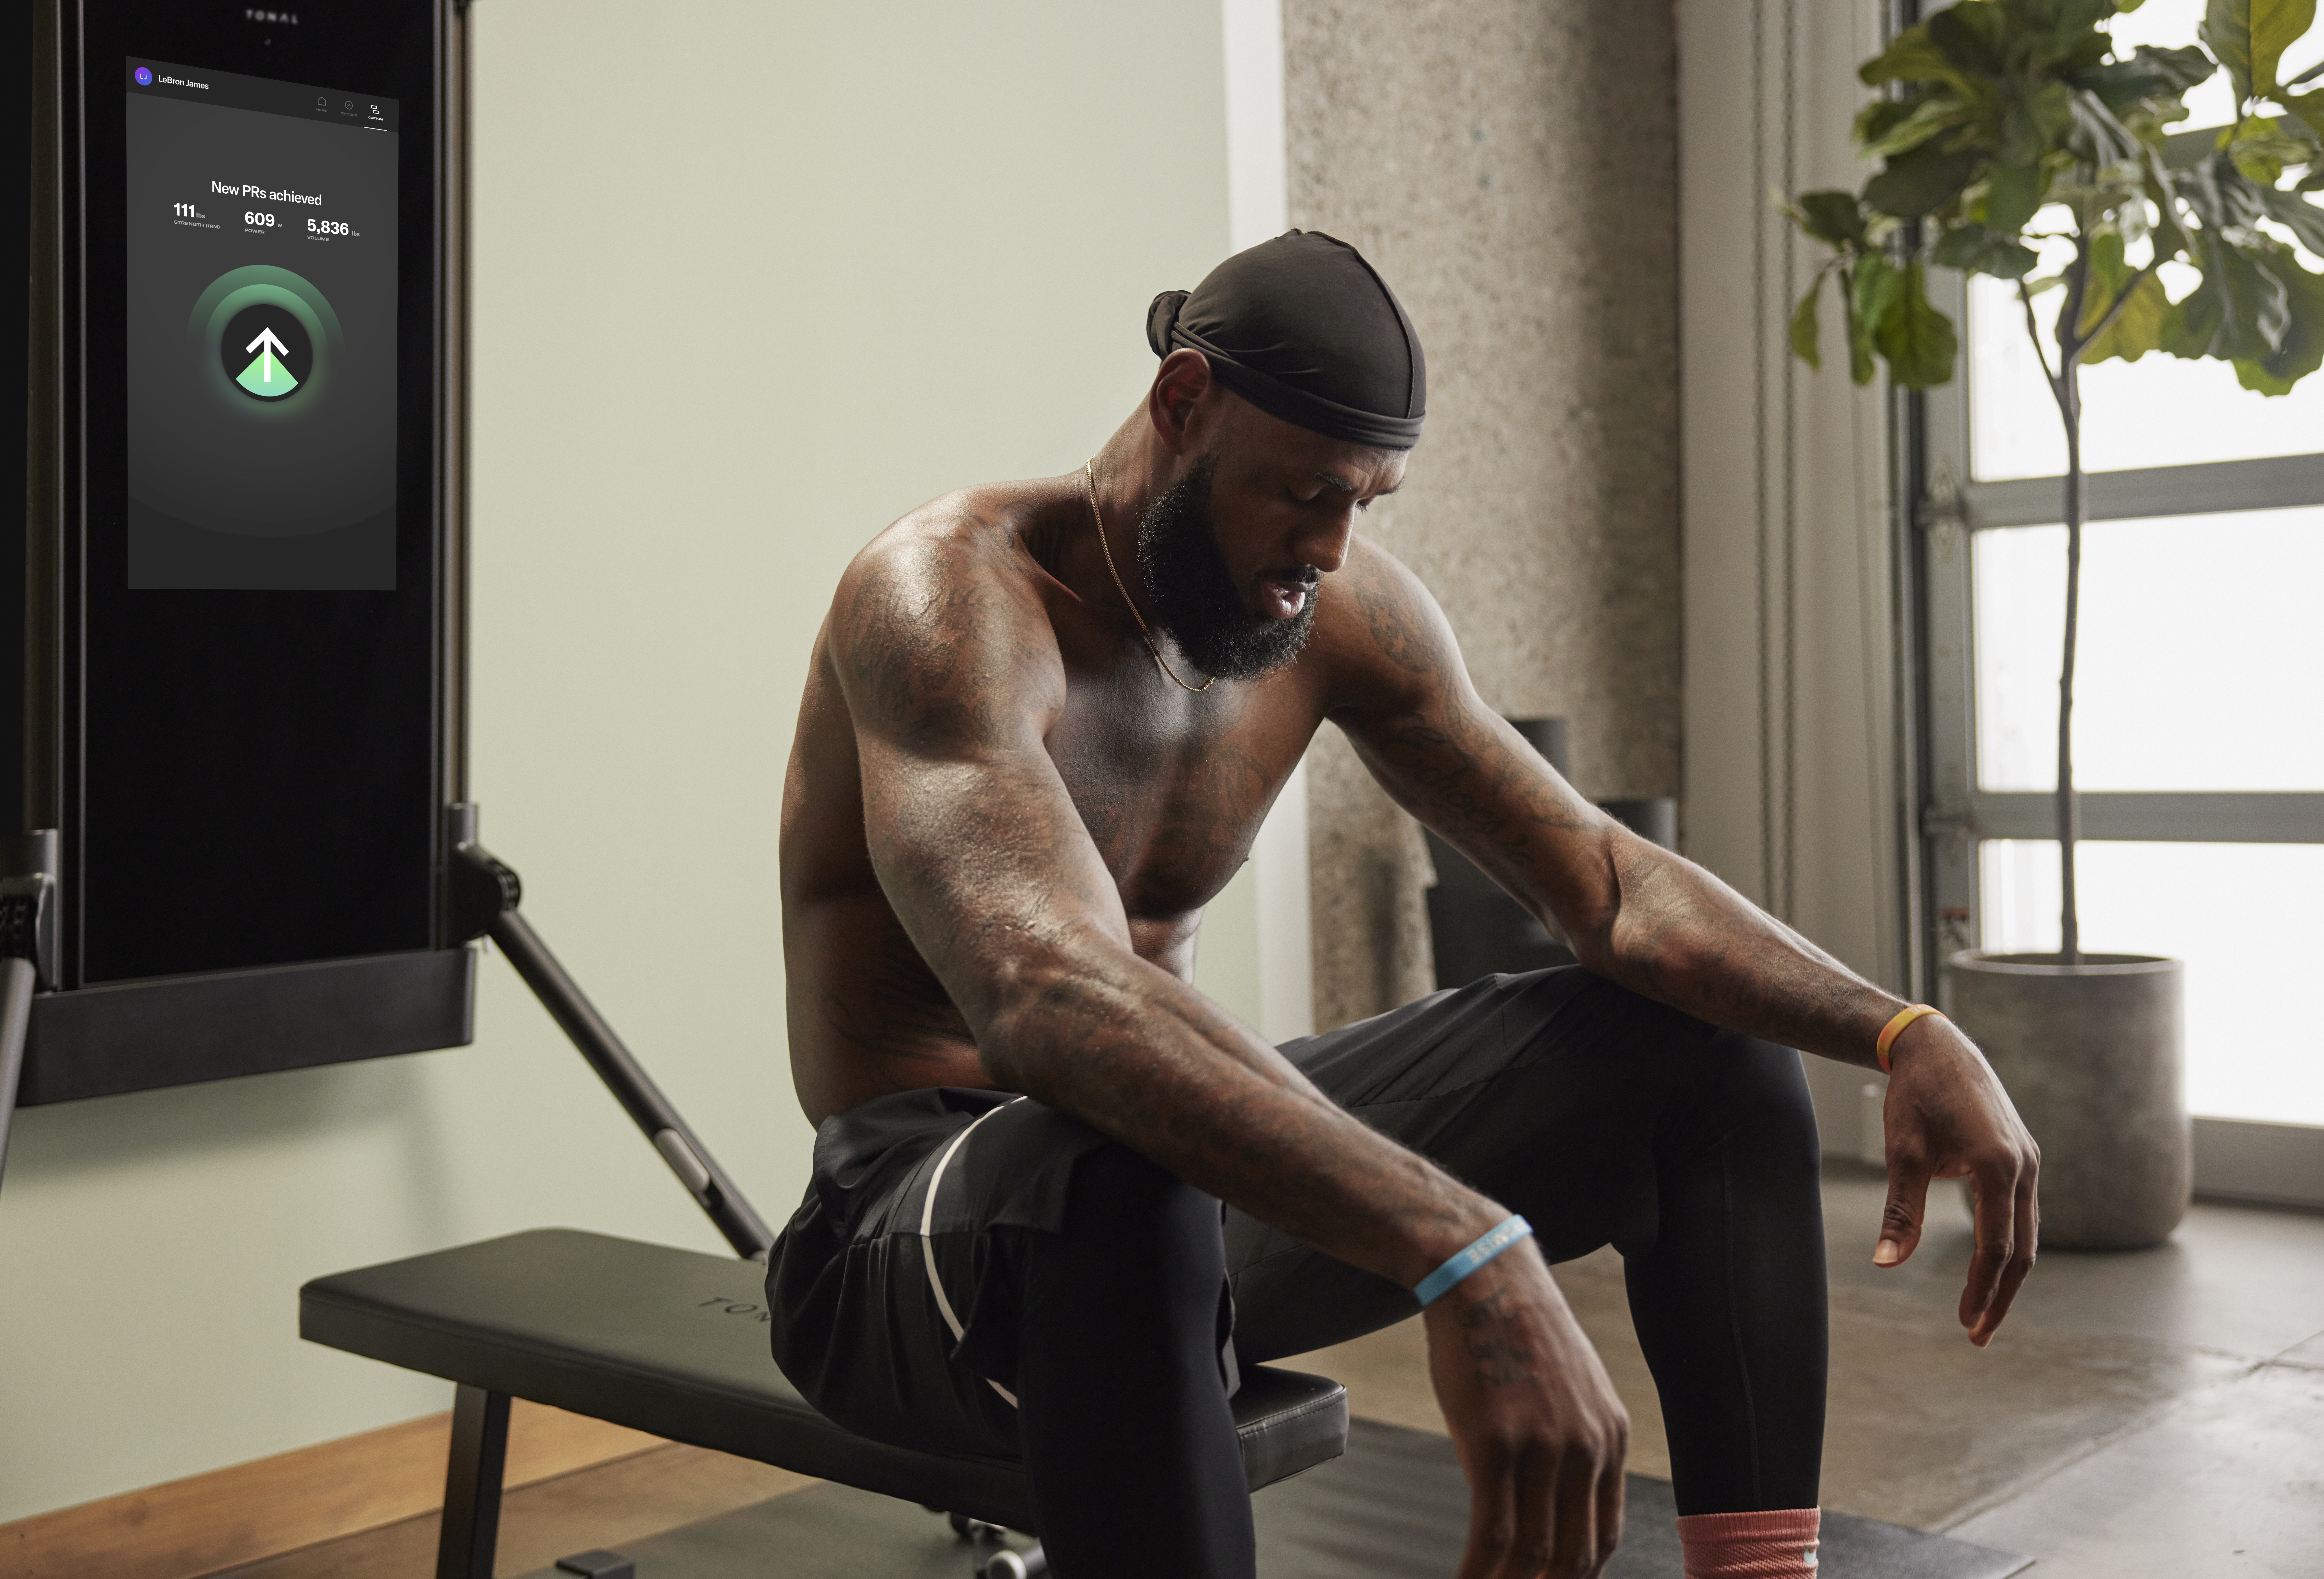 LeBron James' workout and diet: how the NBA star stays in shape - 9Coach